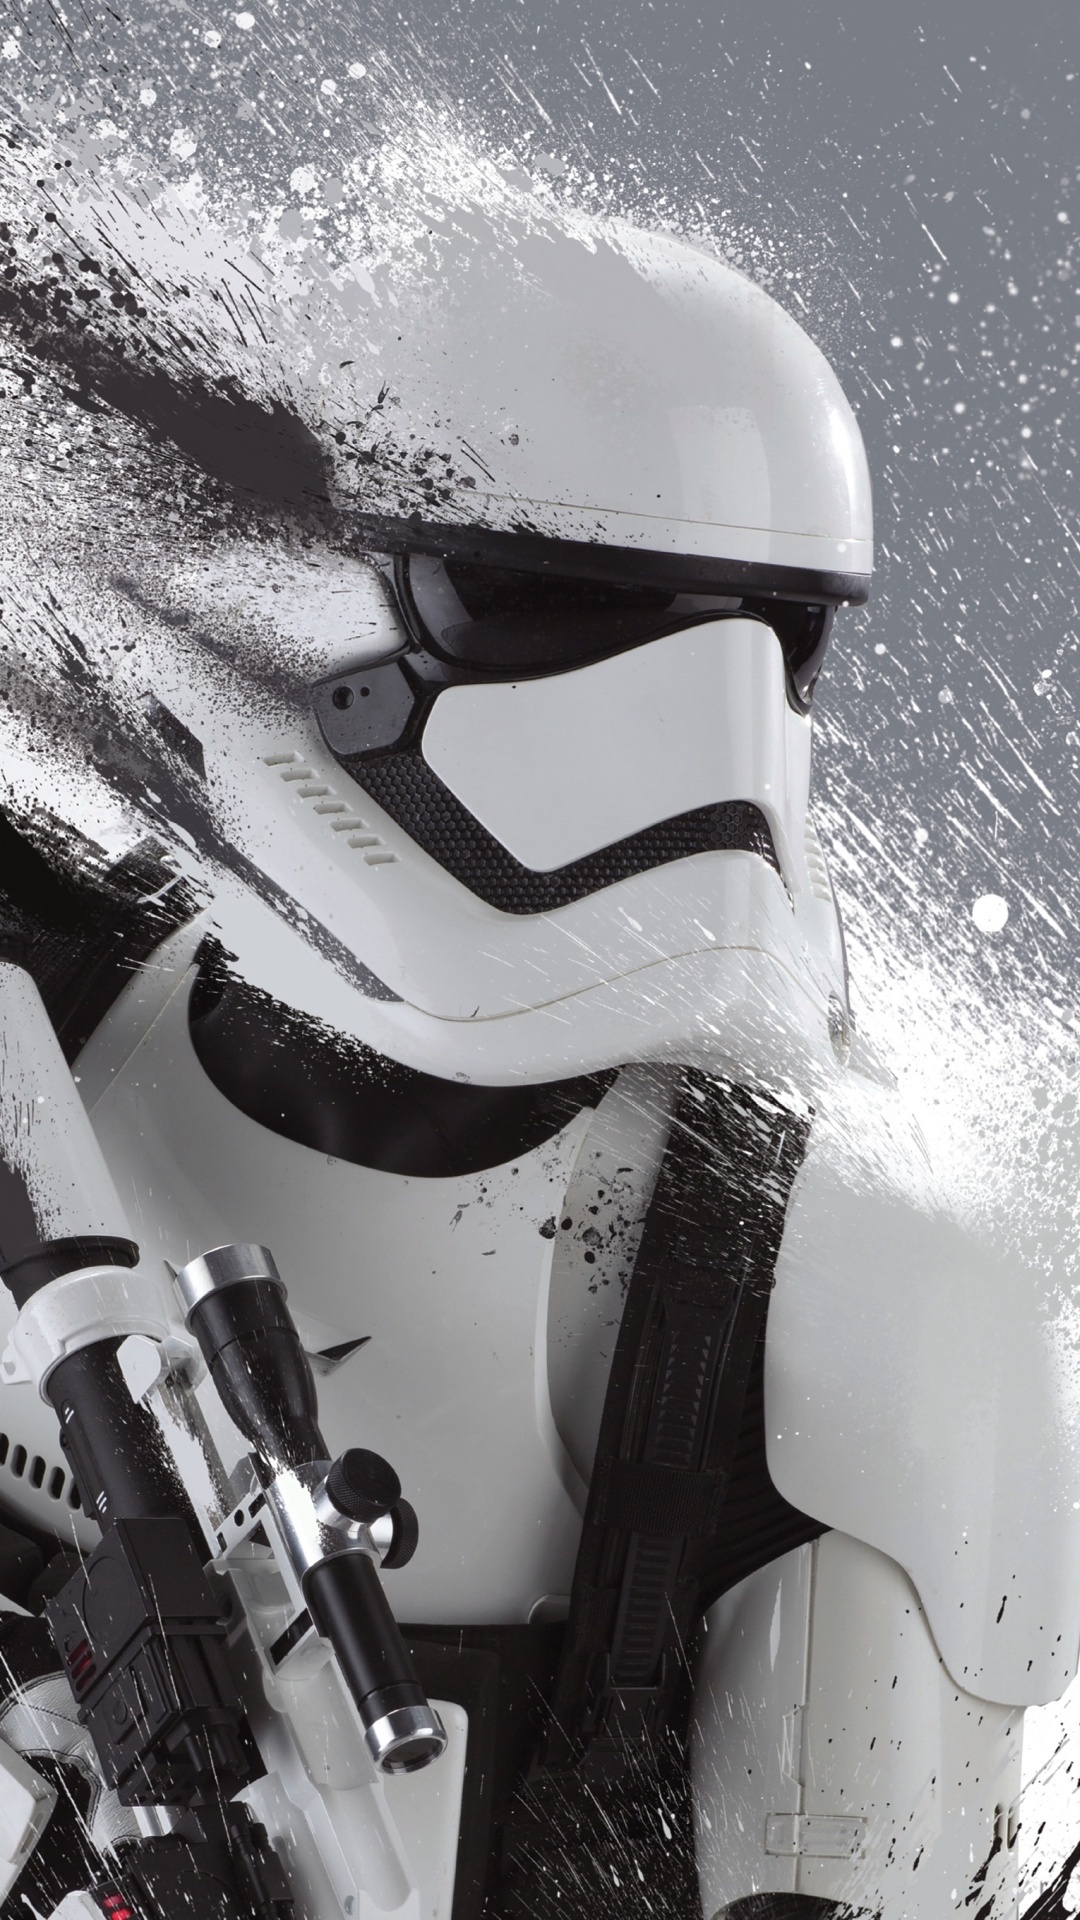 Star Wars The Force Awakens iPhone wallpapers